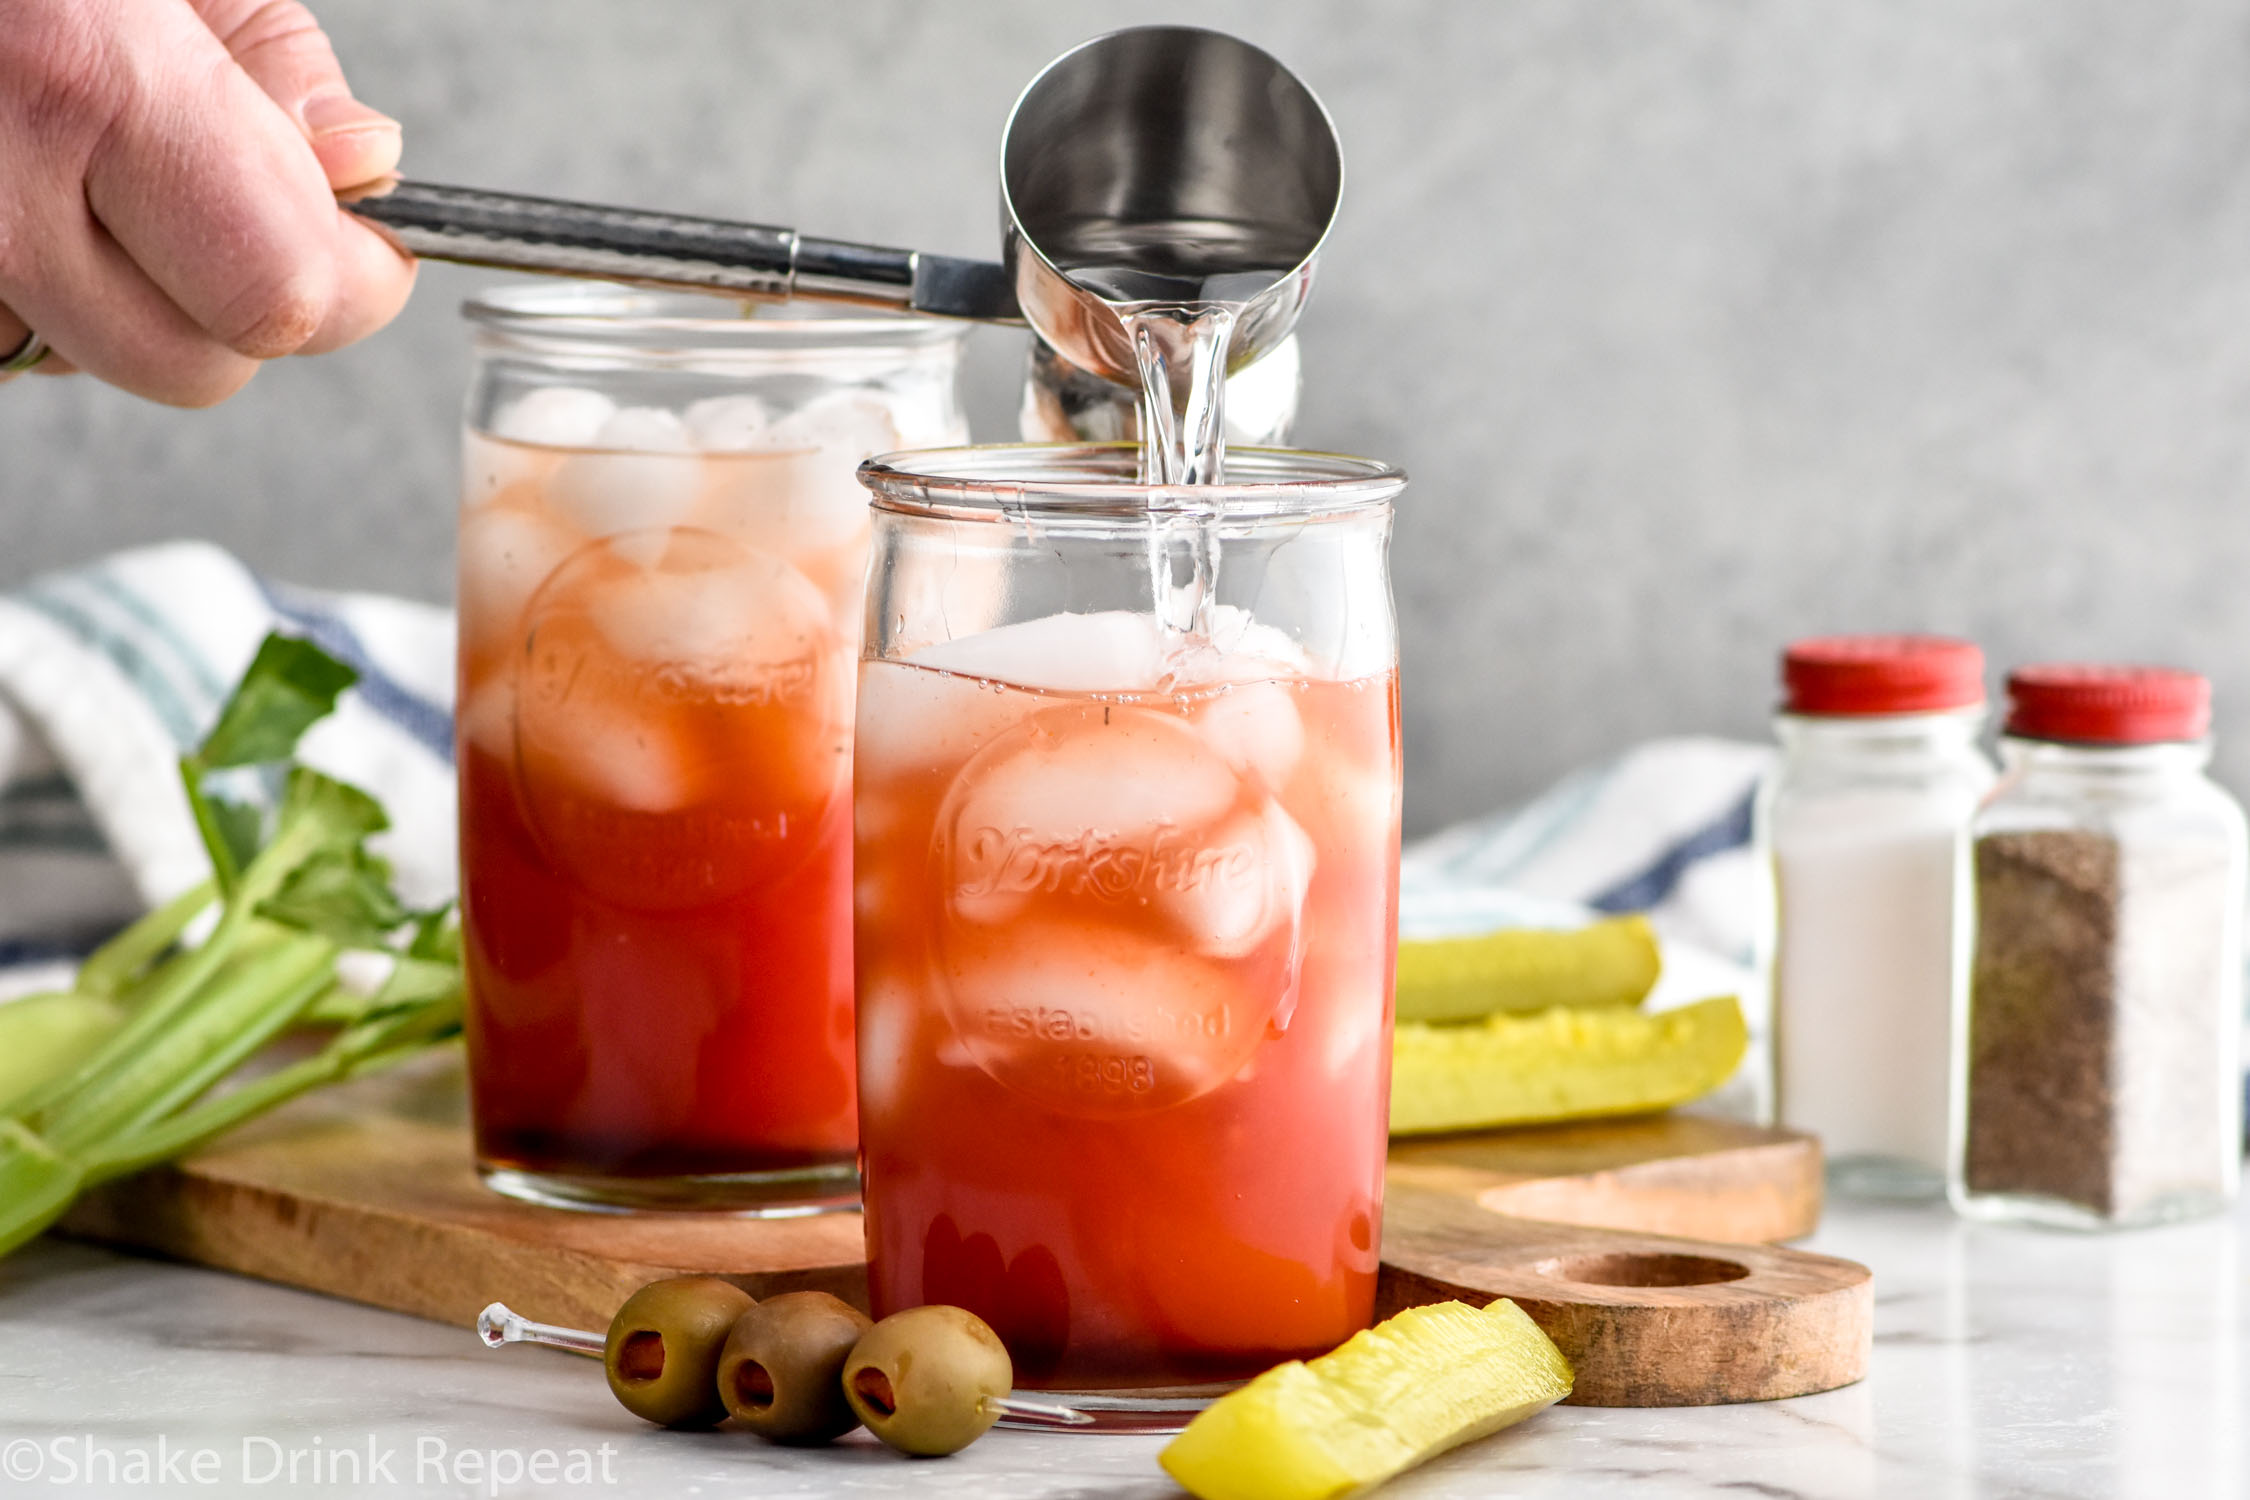 Photo of person's hand pouring vodka into glass of ice and ingredients for Bloody Caesar cocktails. Olives, pickles, celery, salt, and pepper on counter for garnish.